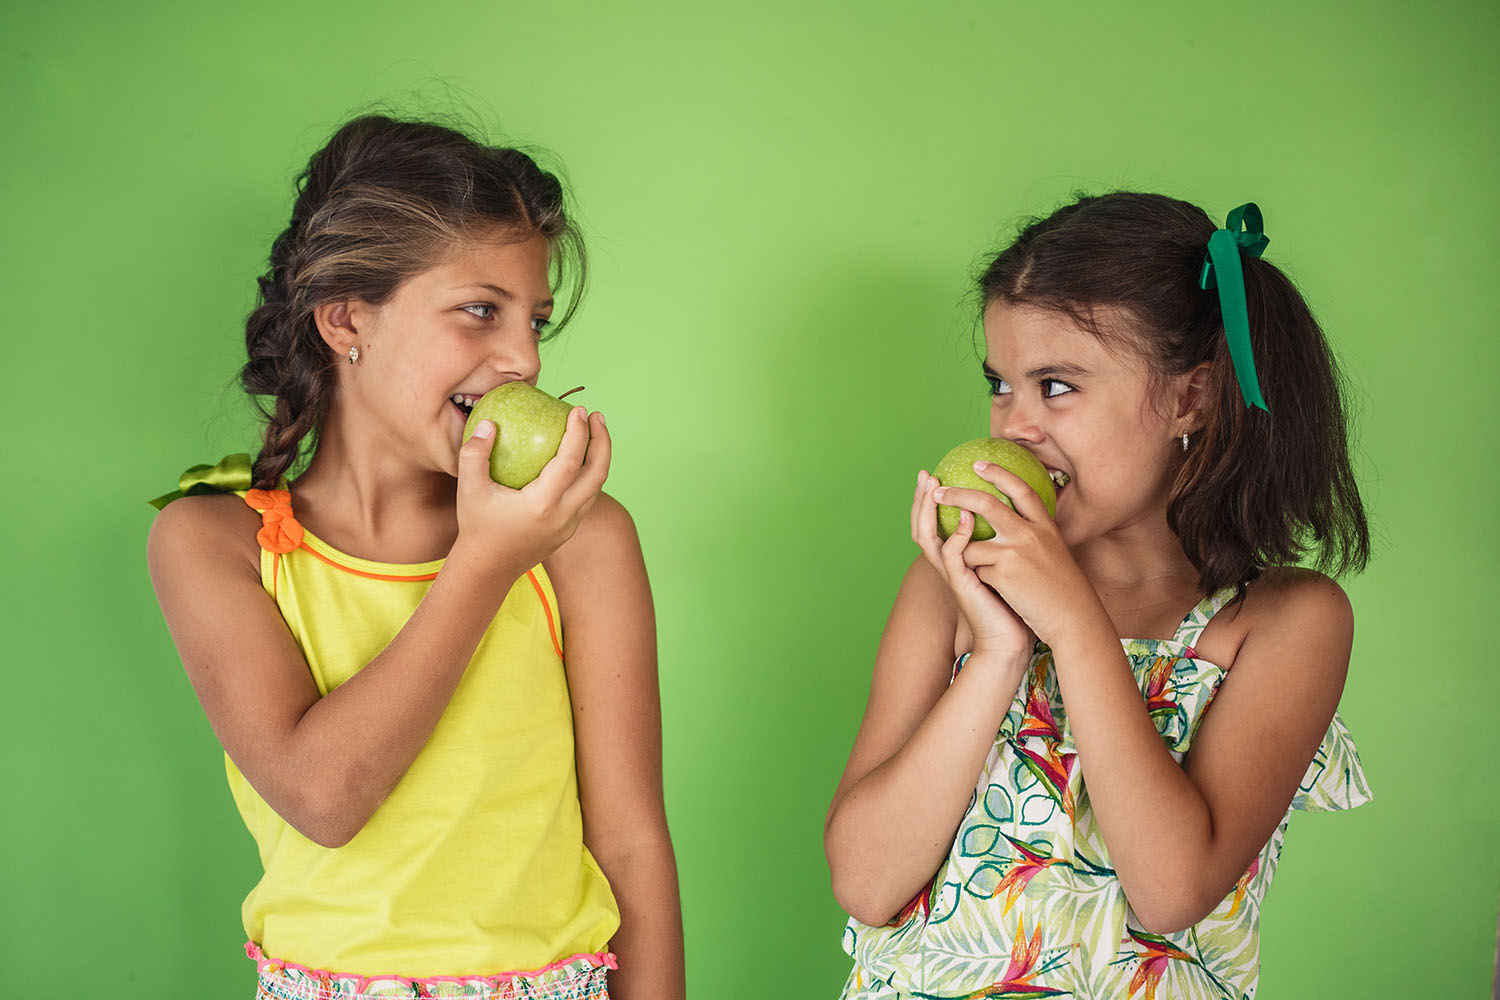 Front view of two girls with ponytails looking at each other and eating green organic apples.